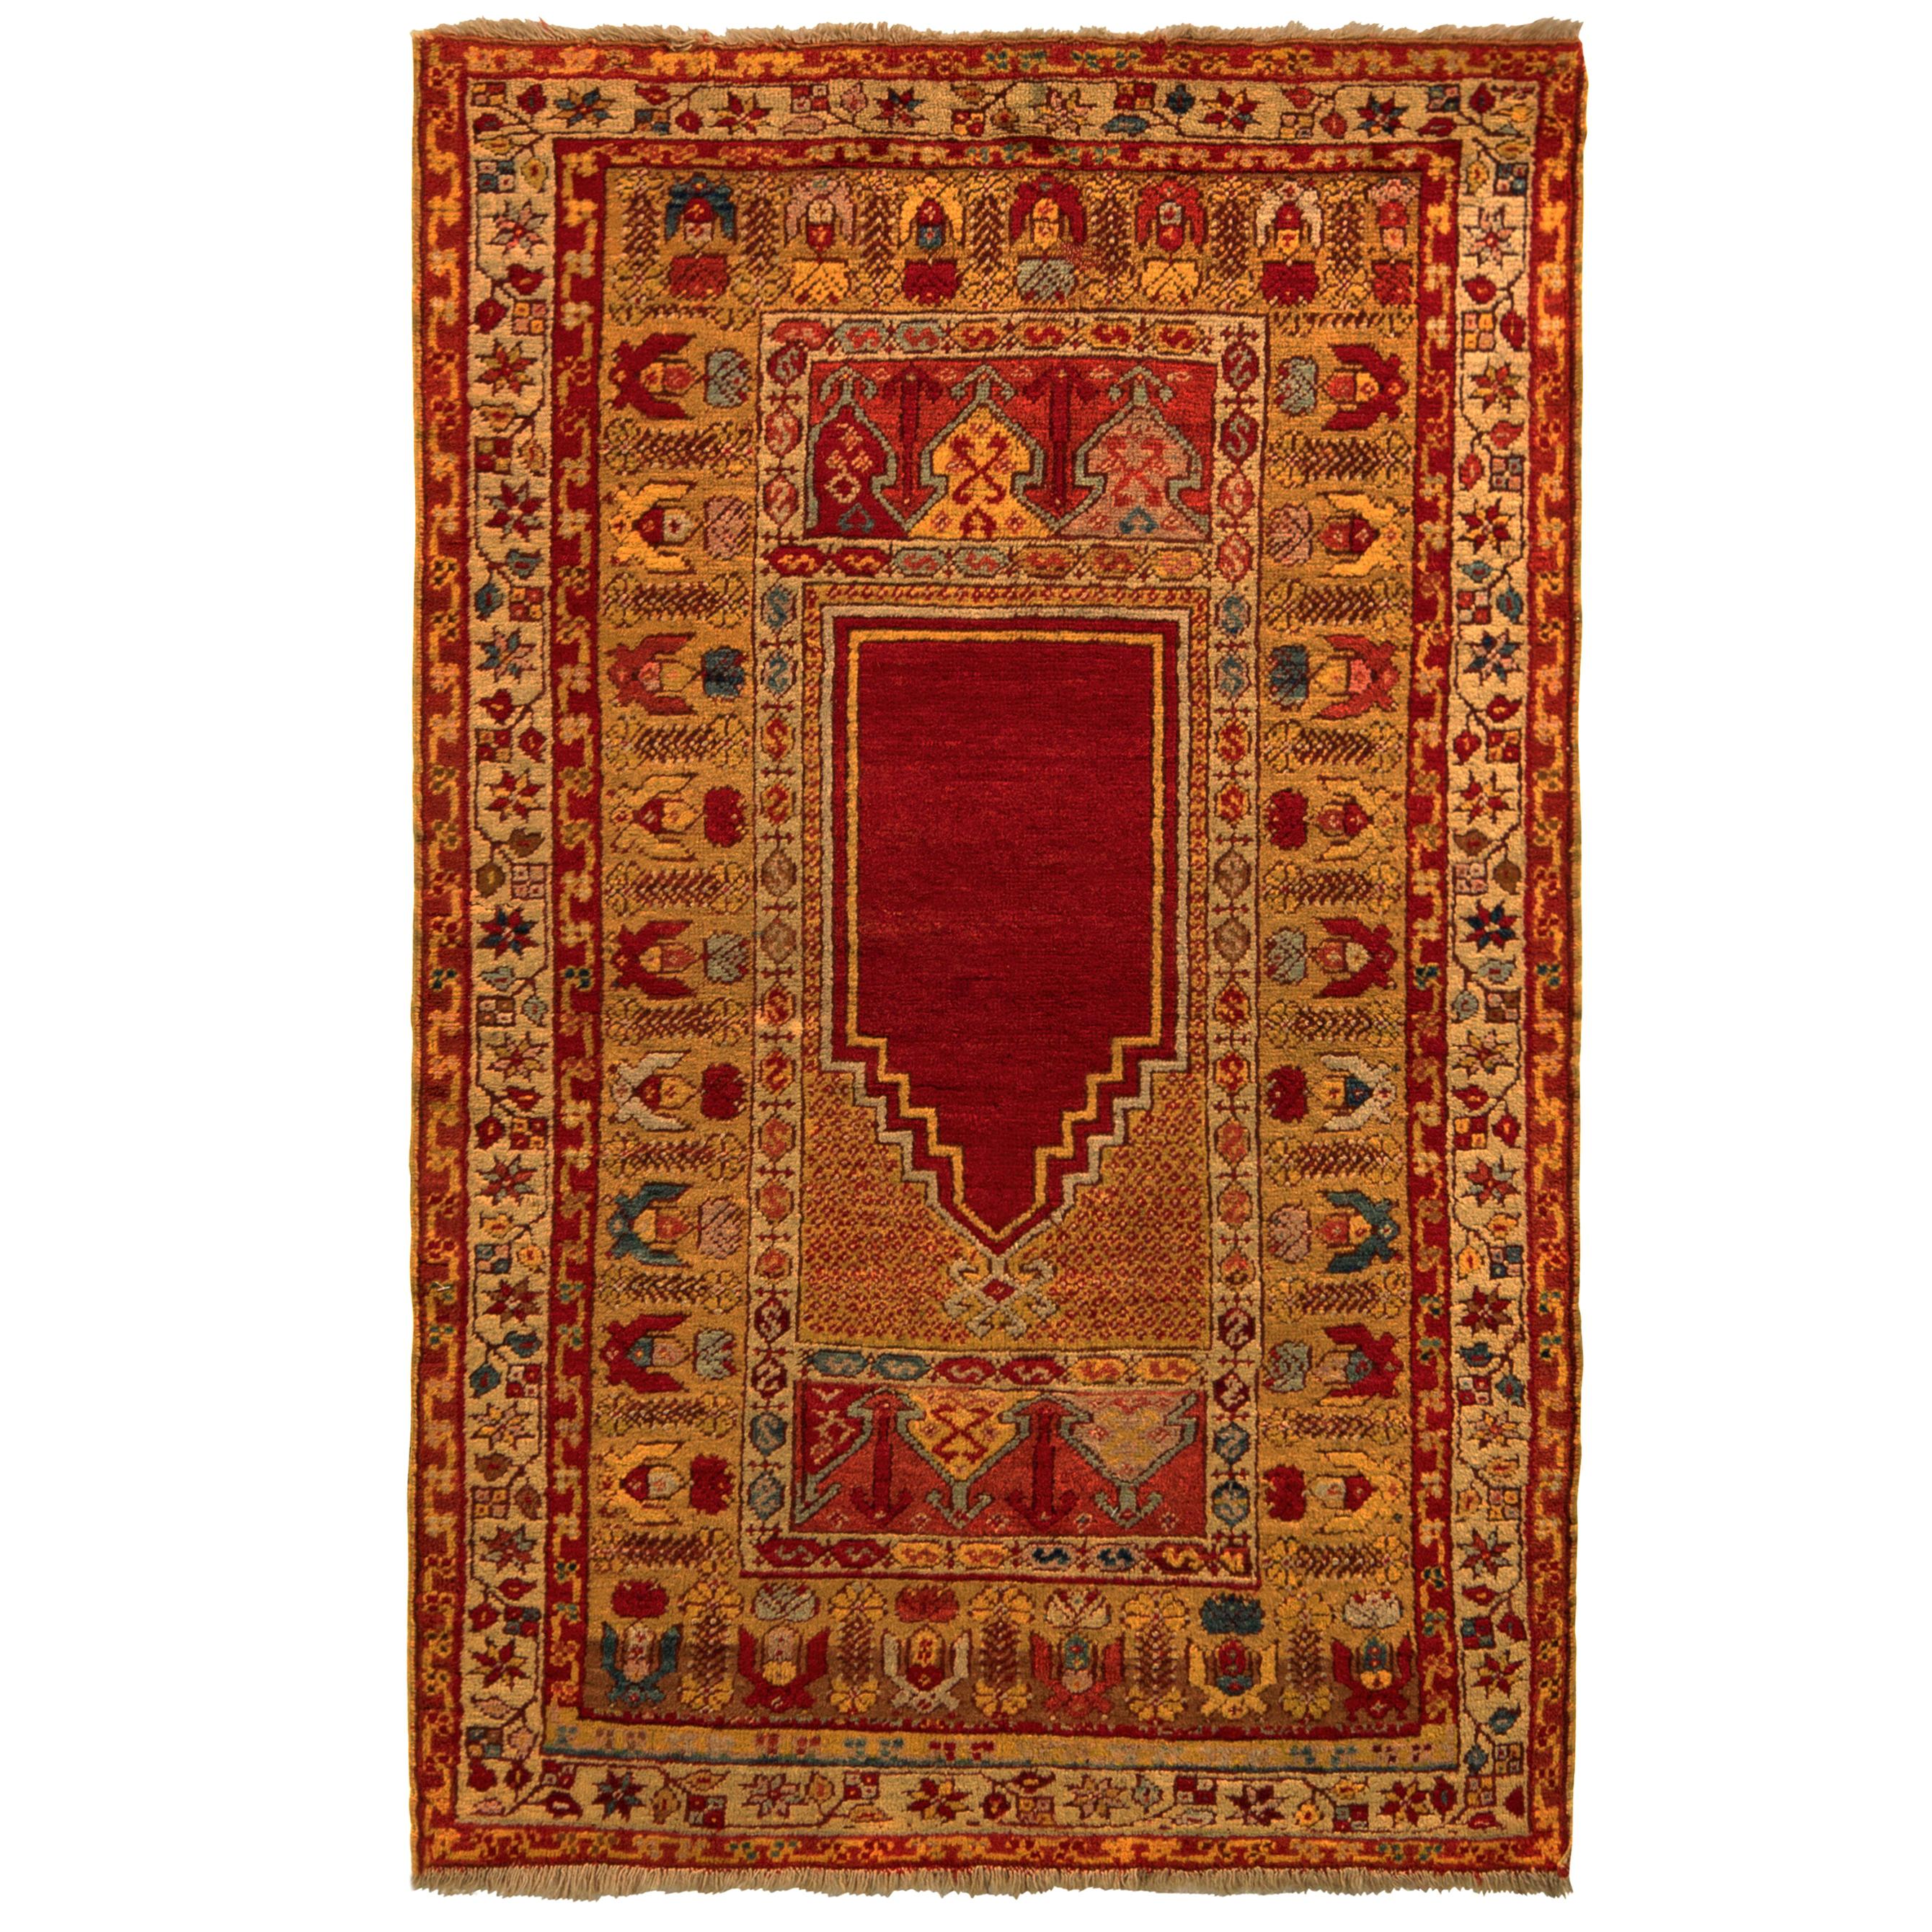 Hand Knotted Antique Karshi Persian Rug in Gold and Red Mihrab Pattern